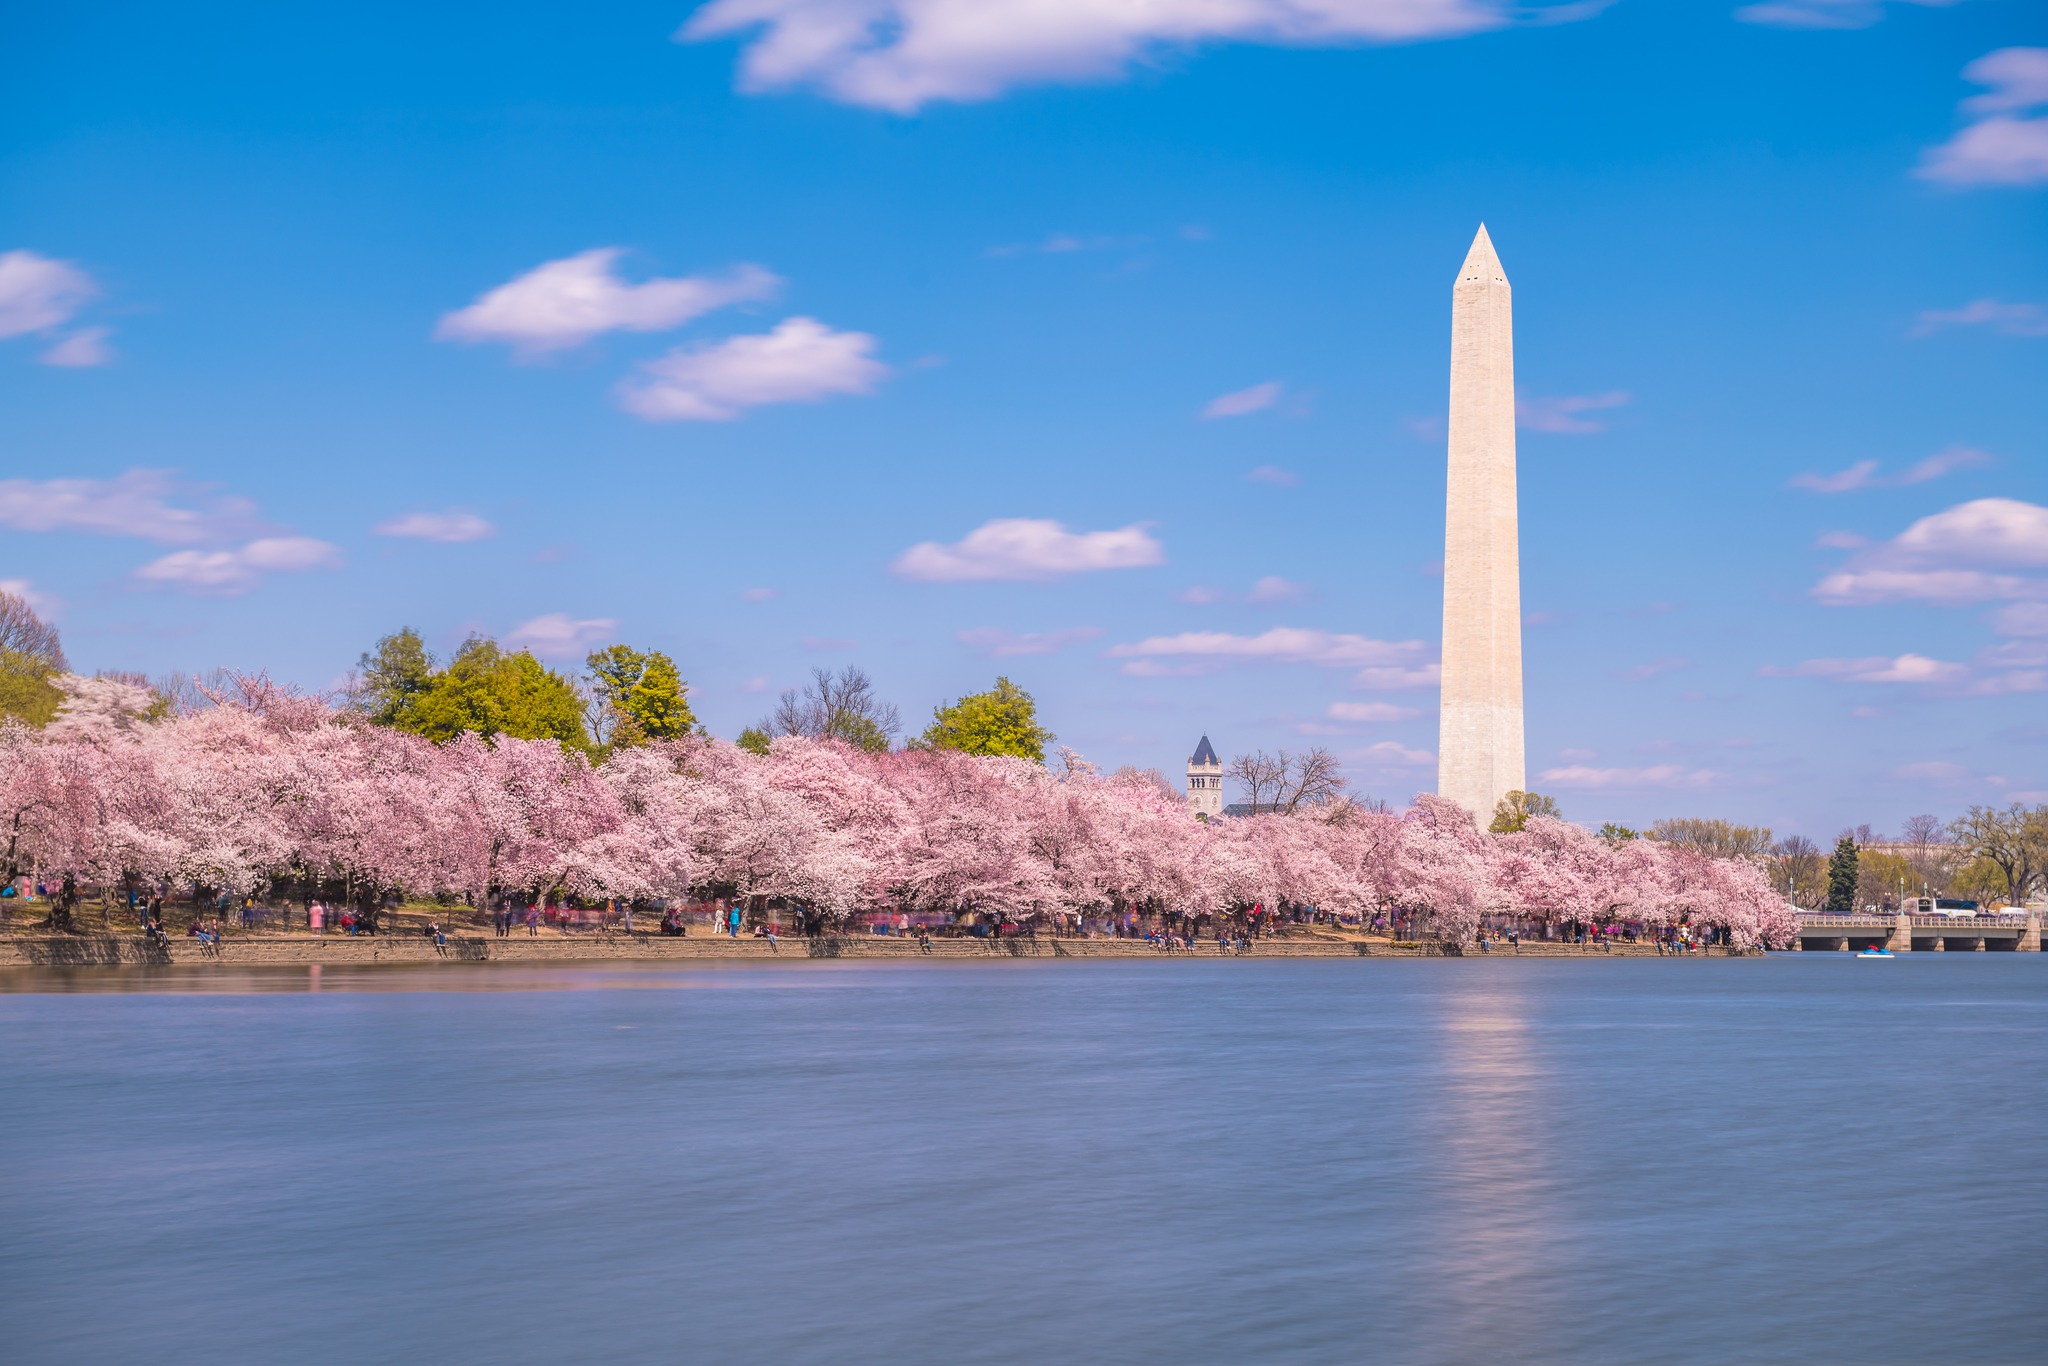 DC Cherry Blossom Festival Moved up to MidMarch Due to Warm Winter